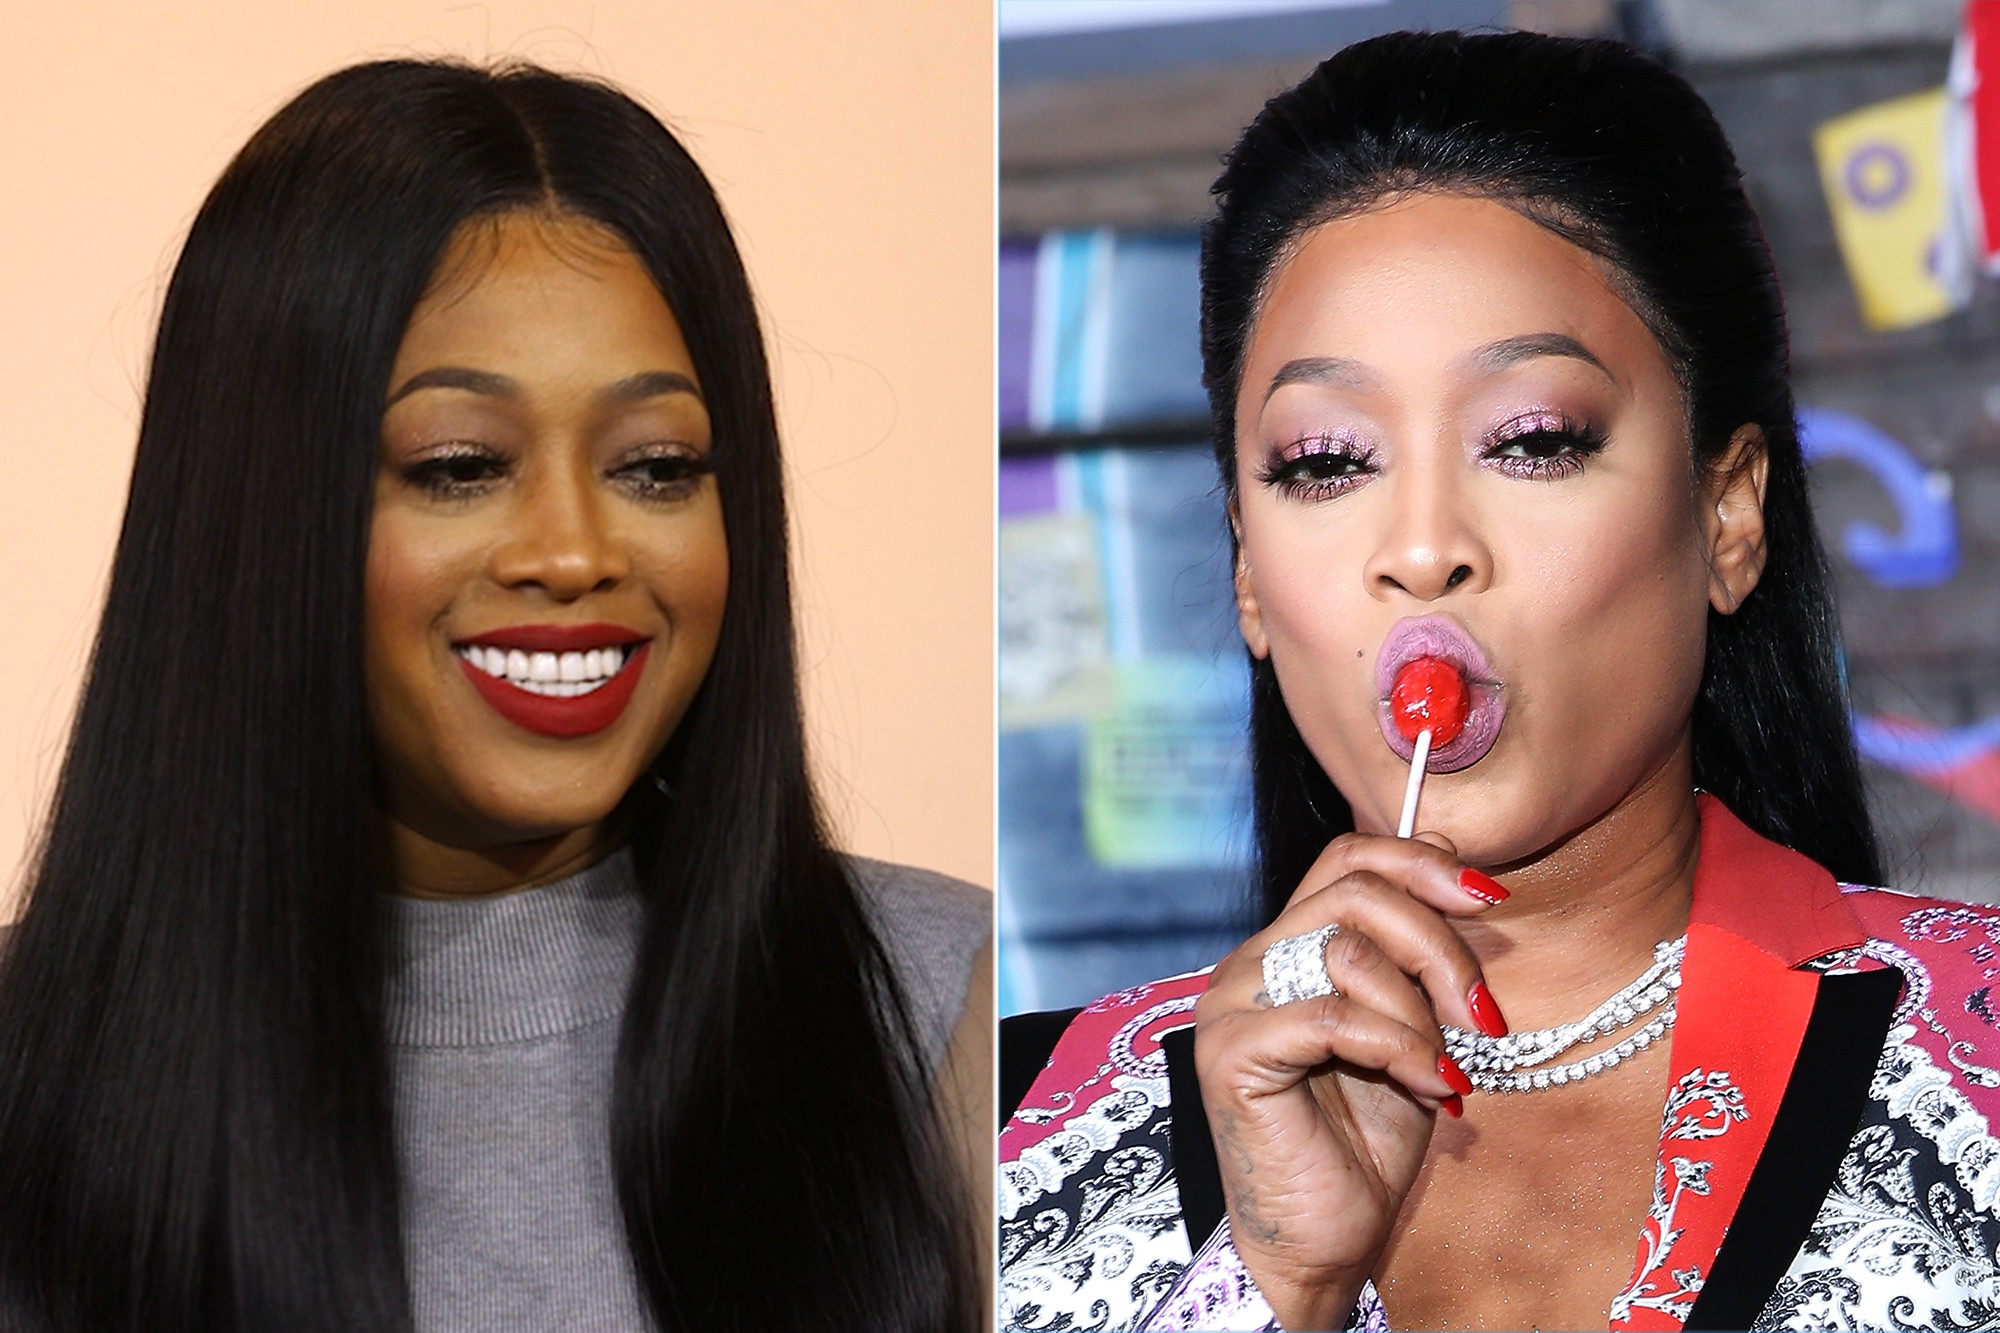 Video: Here's how to get a booty like Trina from 'Love & Hip Hop ...